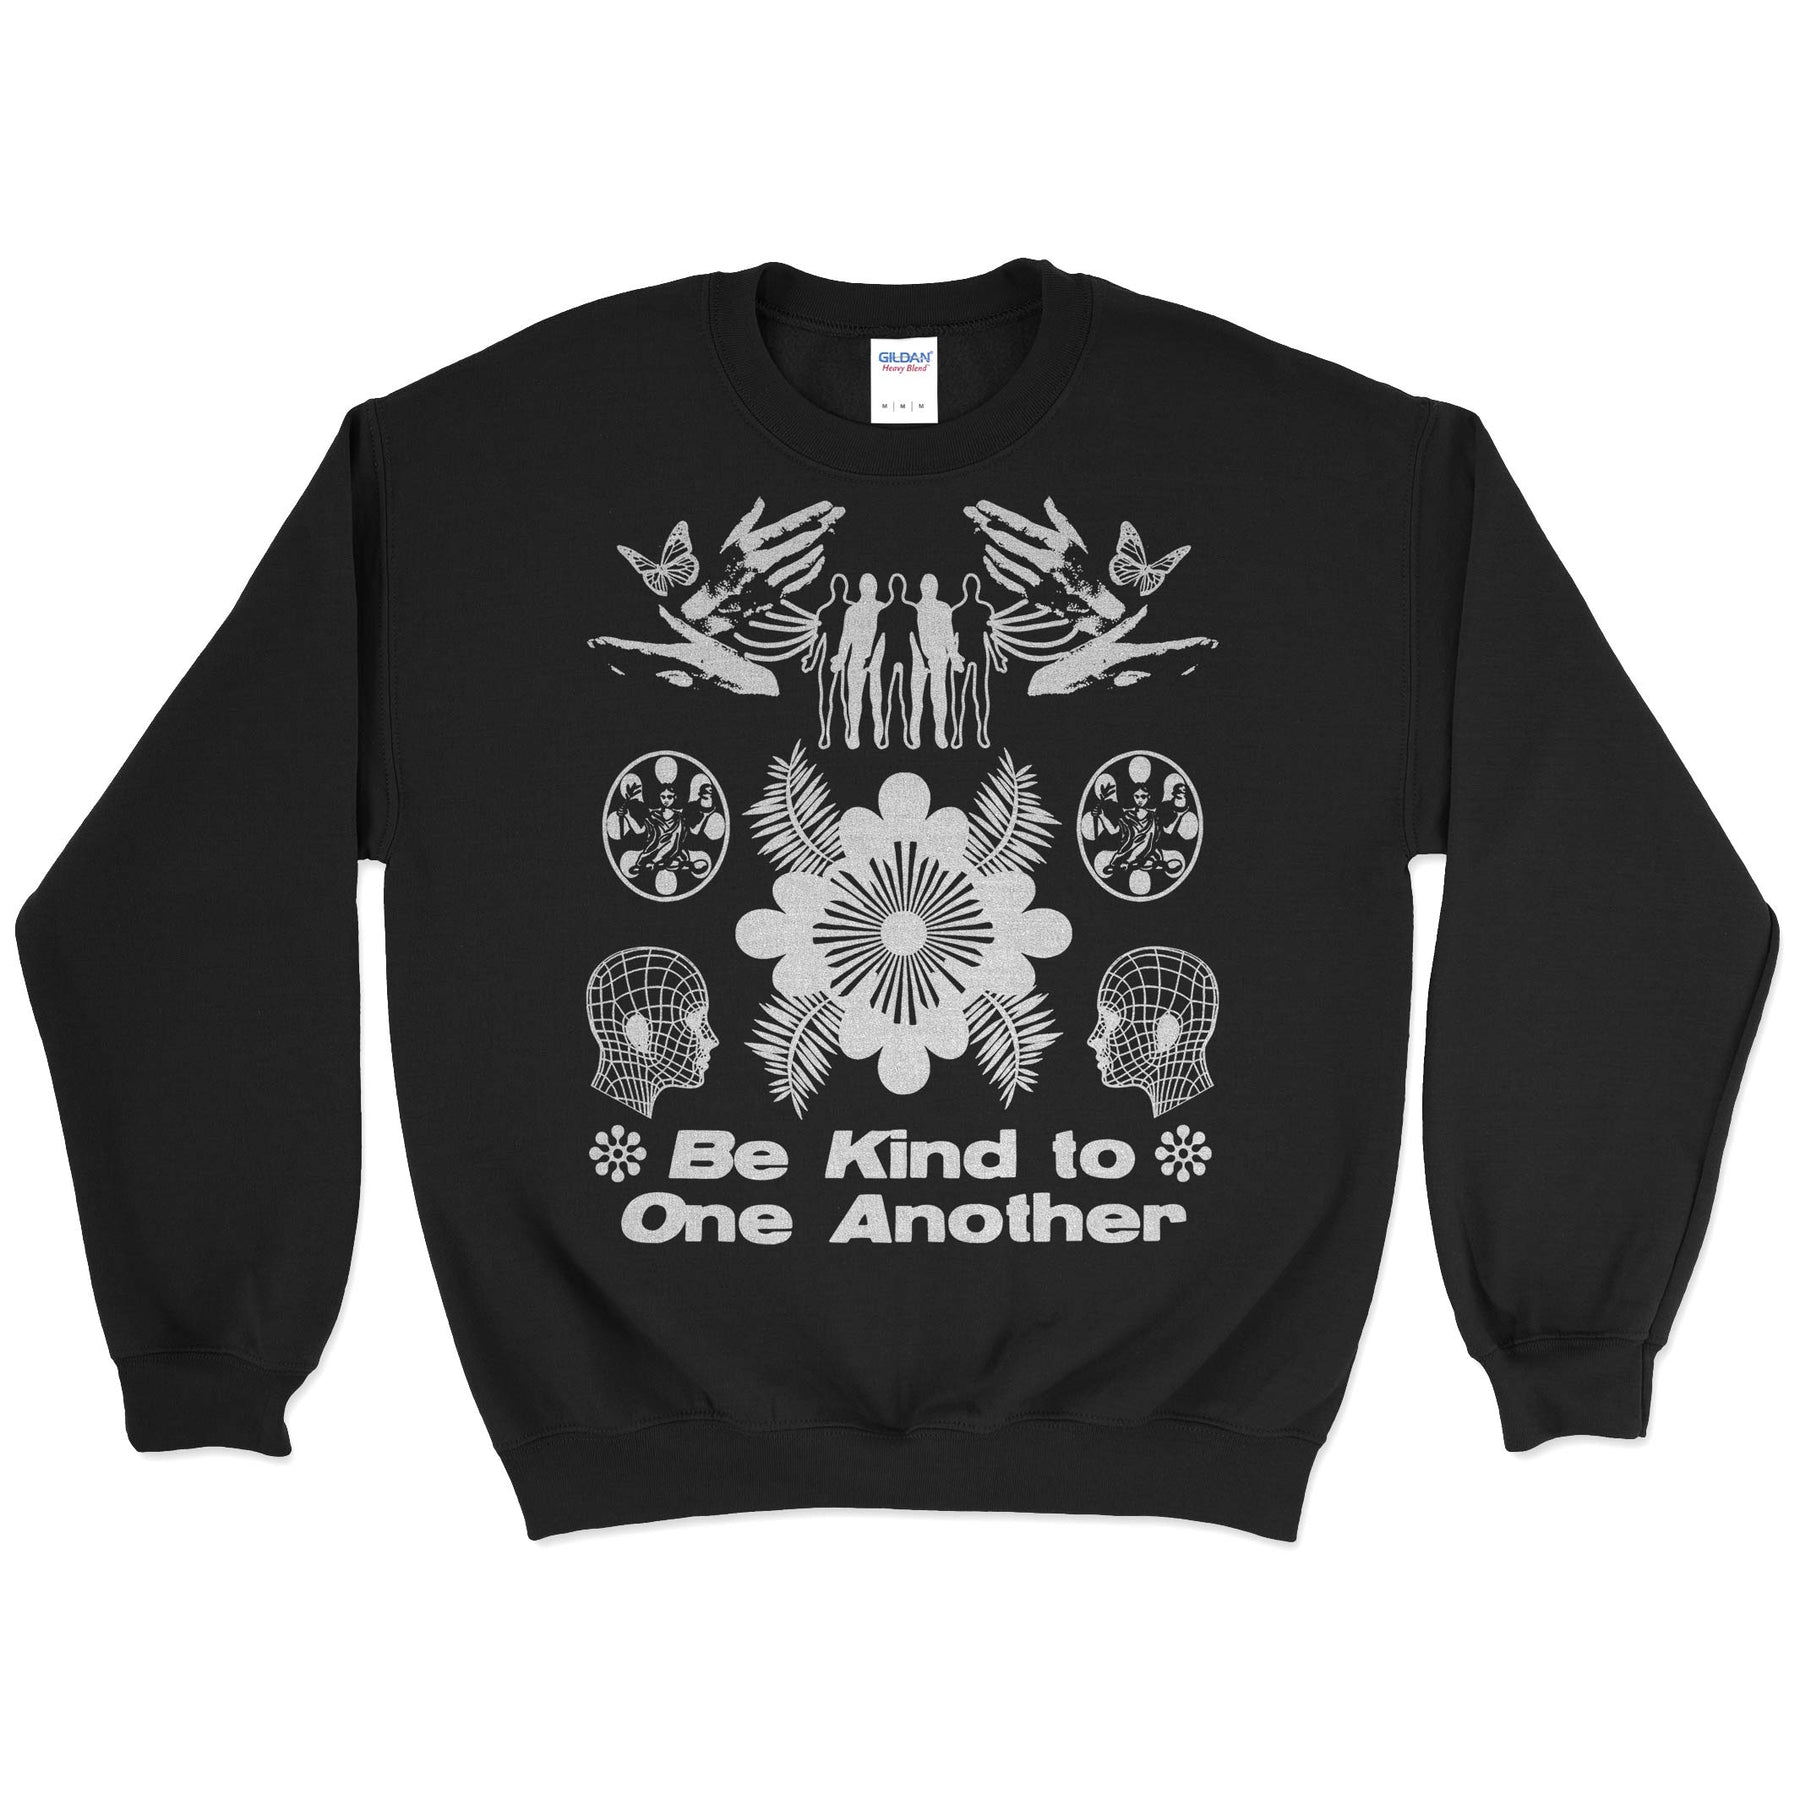 Be Kind To One Another Sweatshirt by Awake Happy